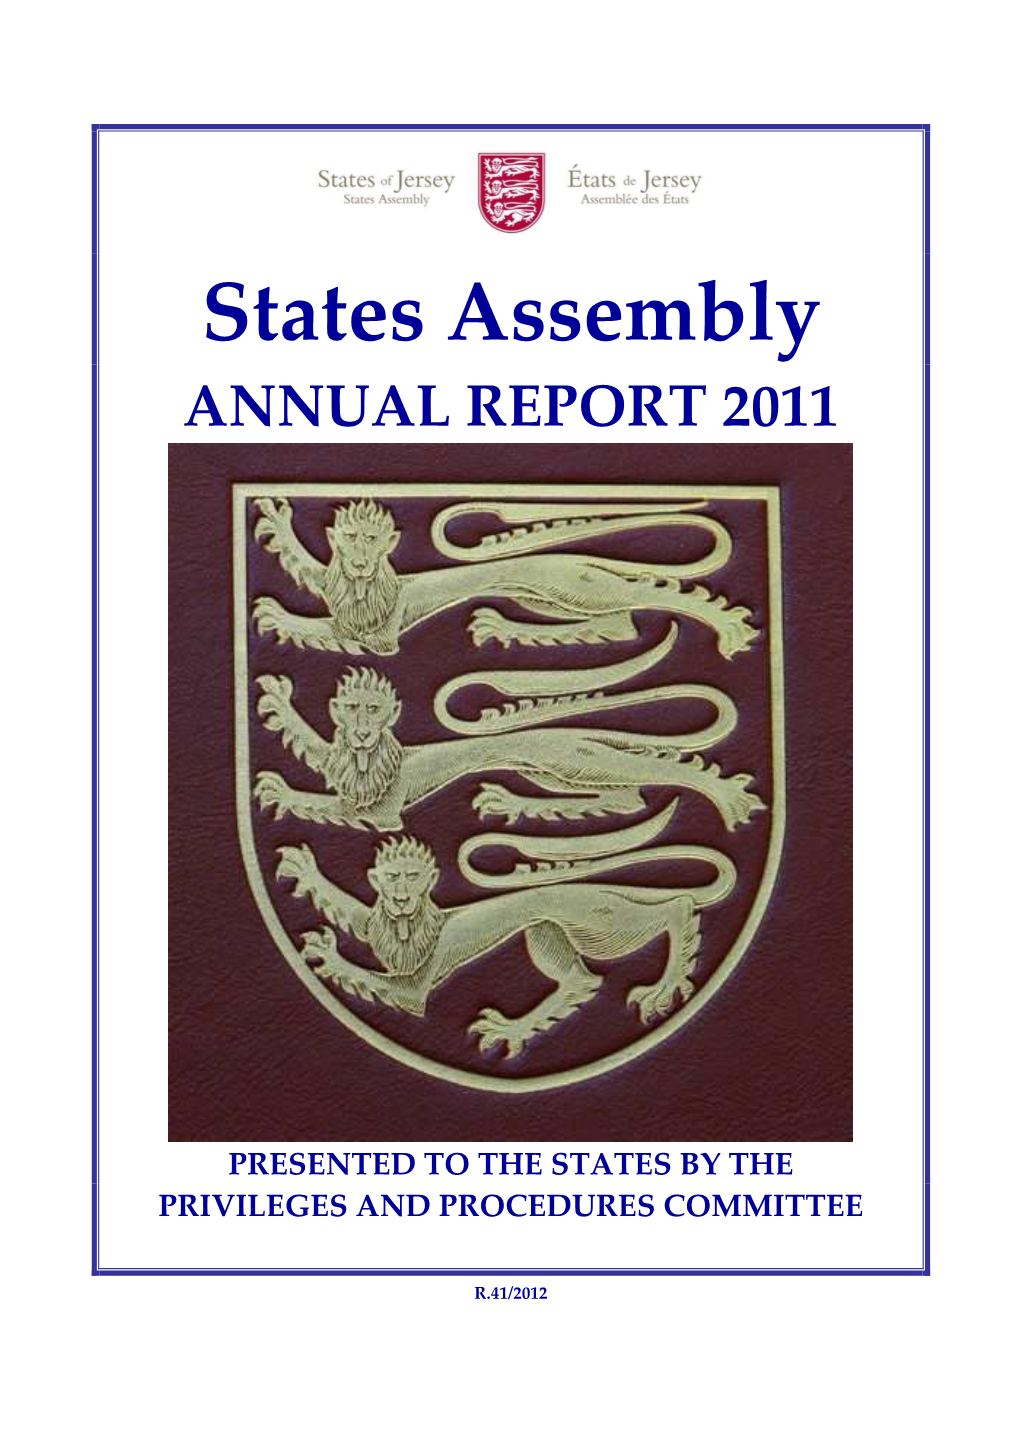 States Assembly ANNUAL REPORT 2011